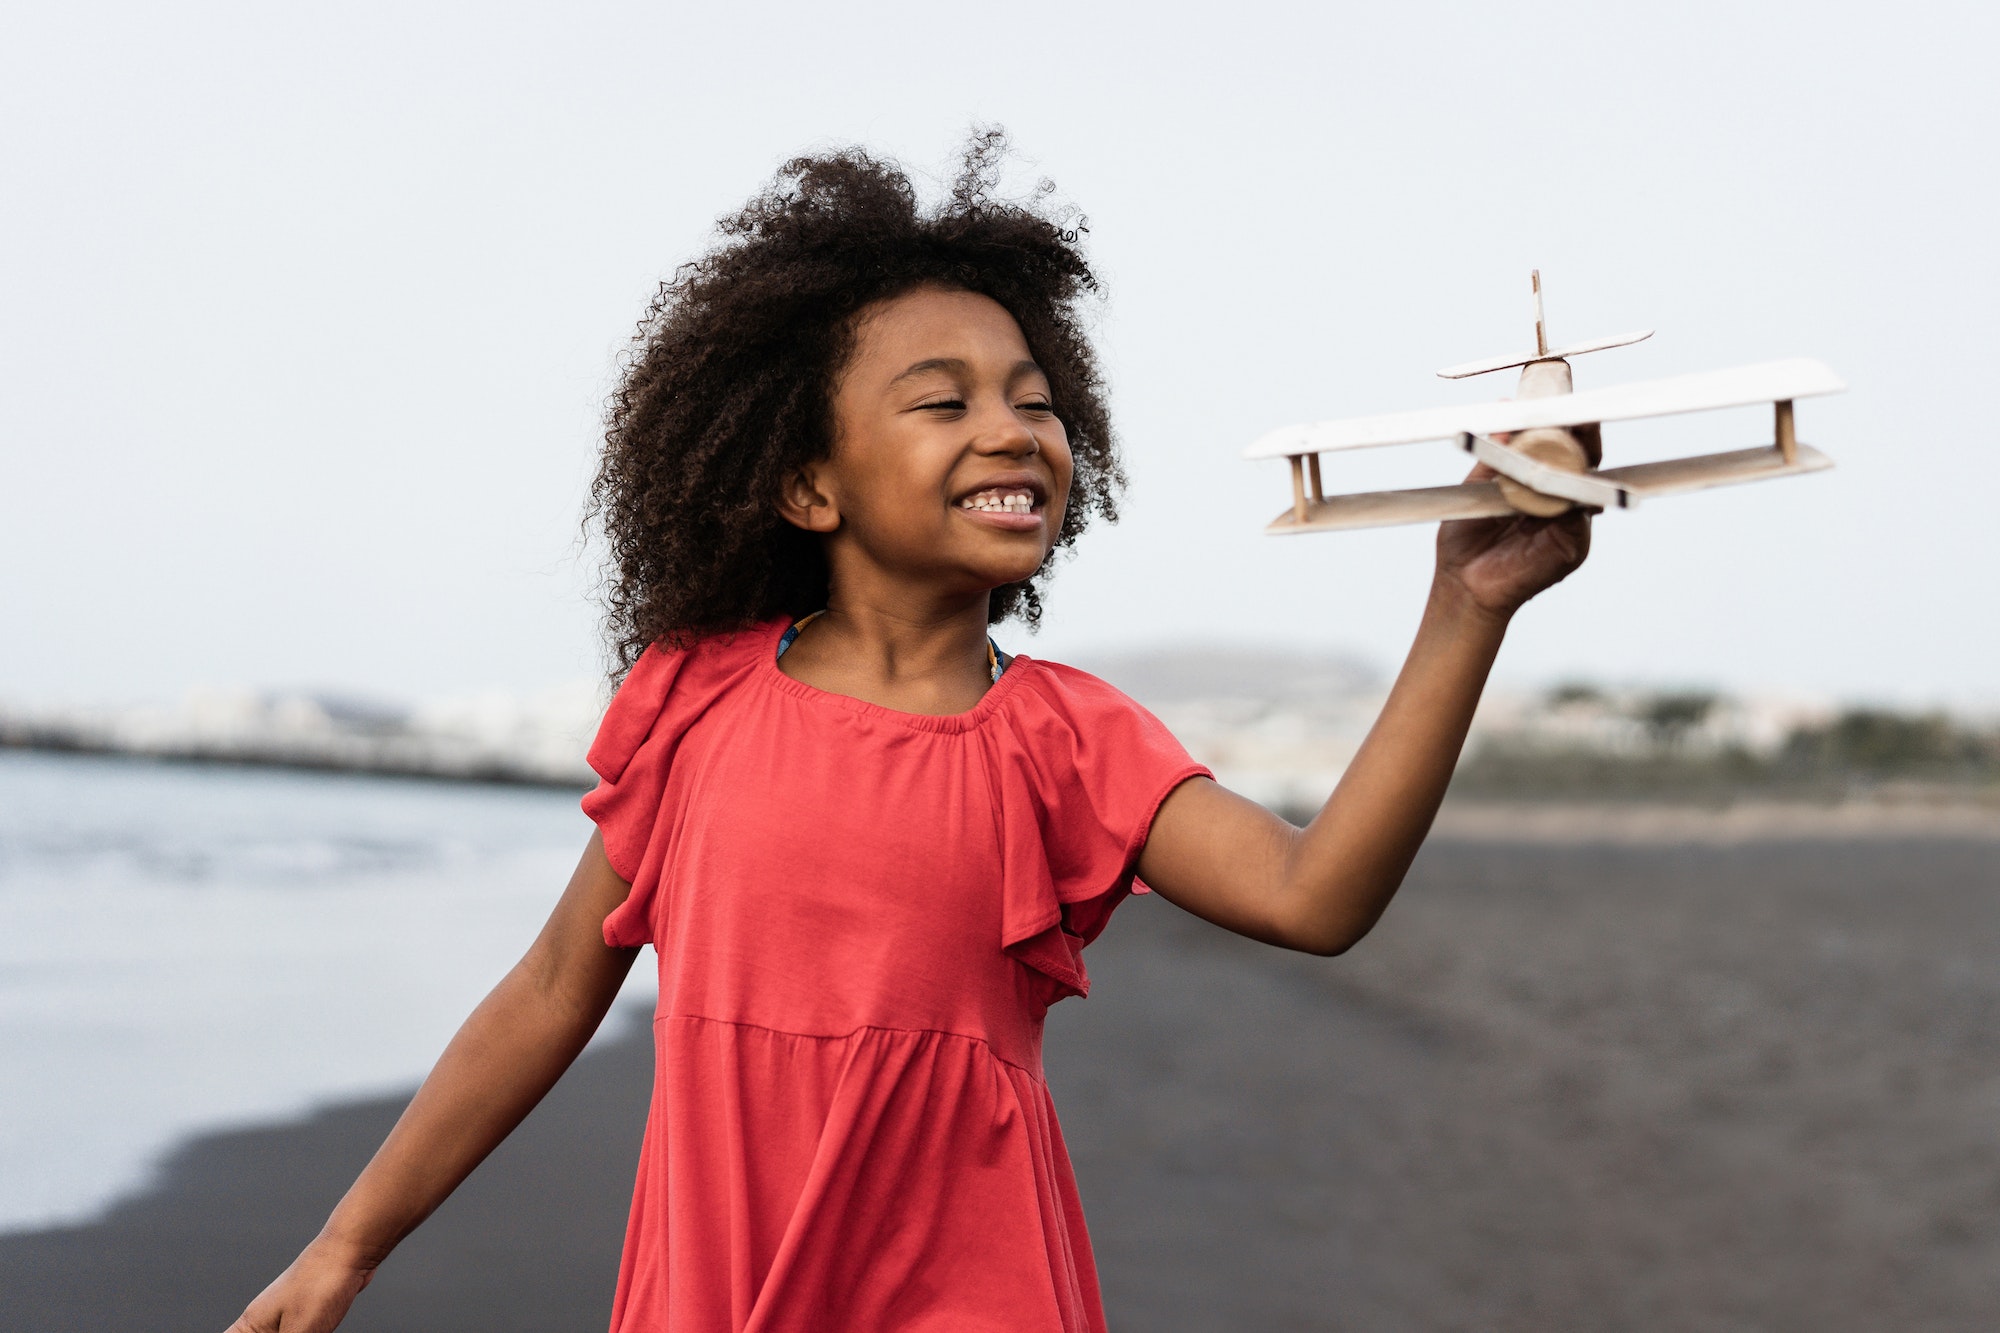 African kid running on the beach while playing with wood toy airplane - Focus on face